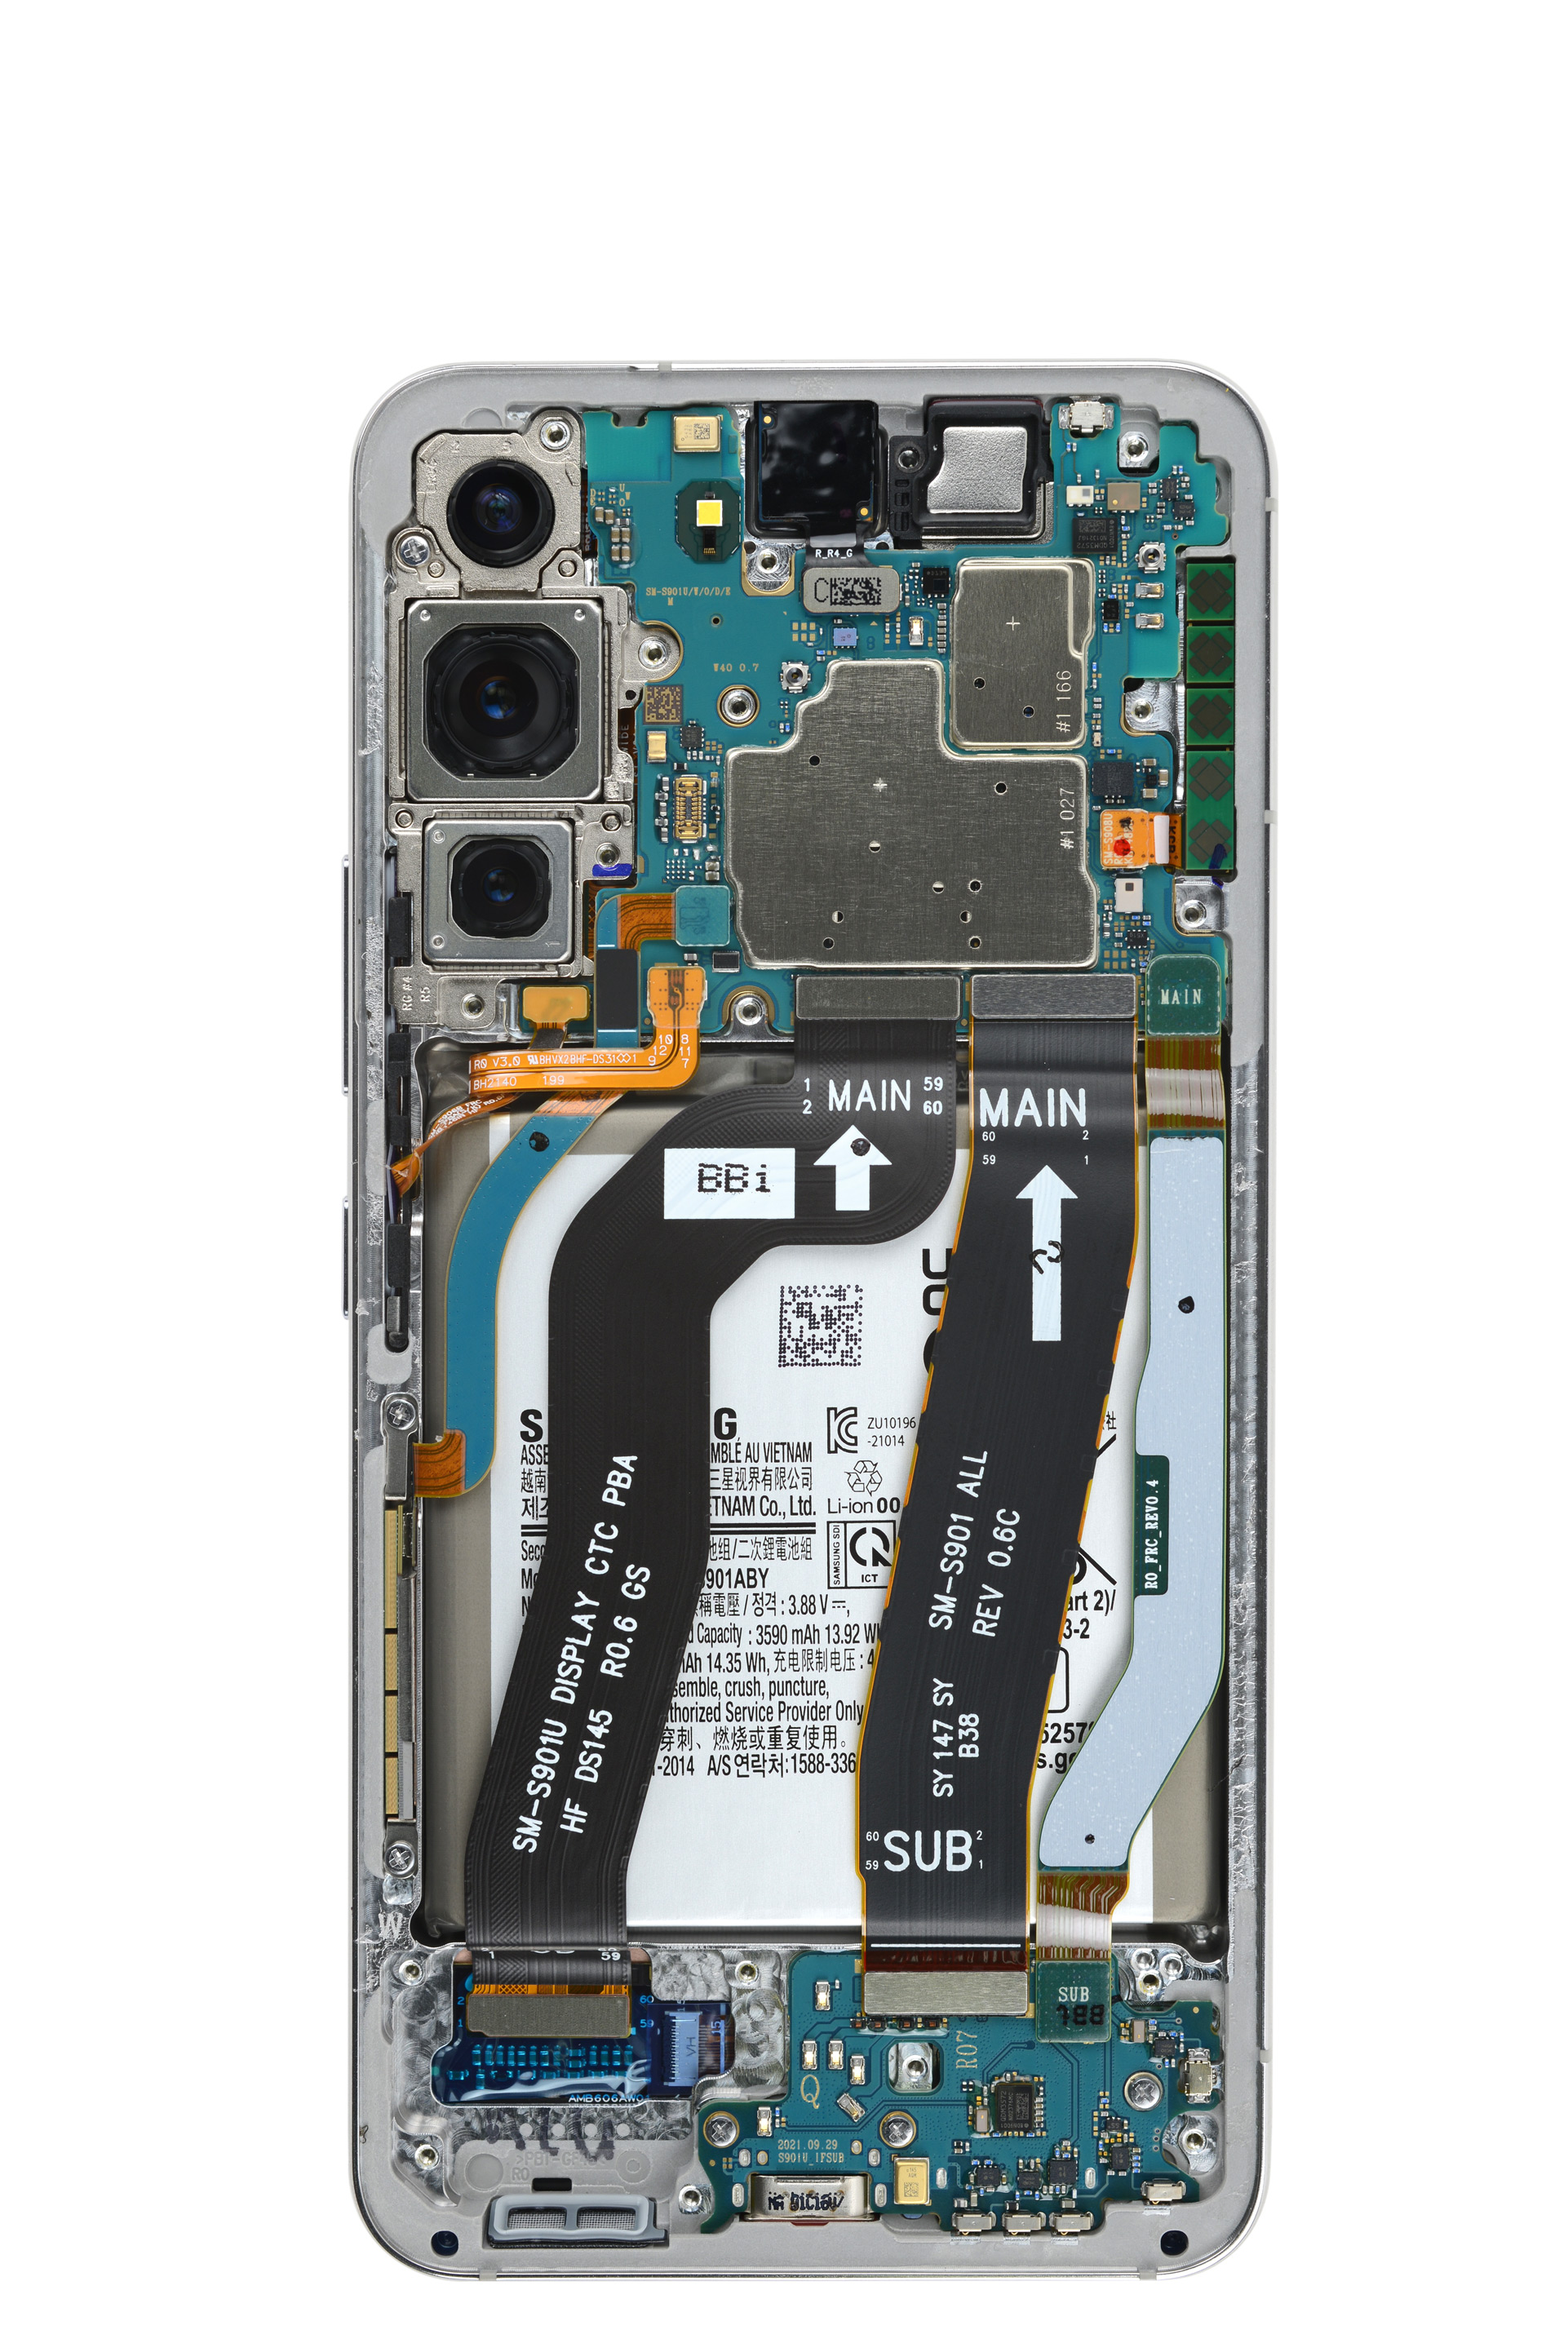 View of the Samsung Galaxy S22 with the rear cover removed, showing battery, motherboard, and interconnect cables among other components.